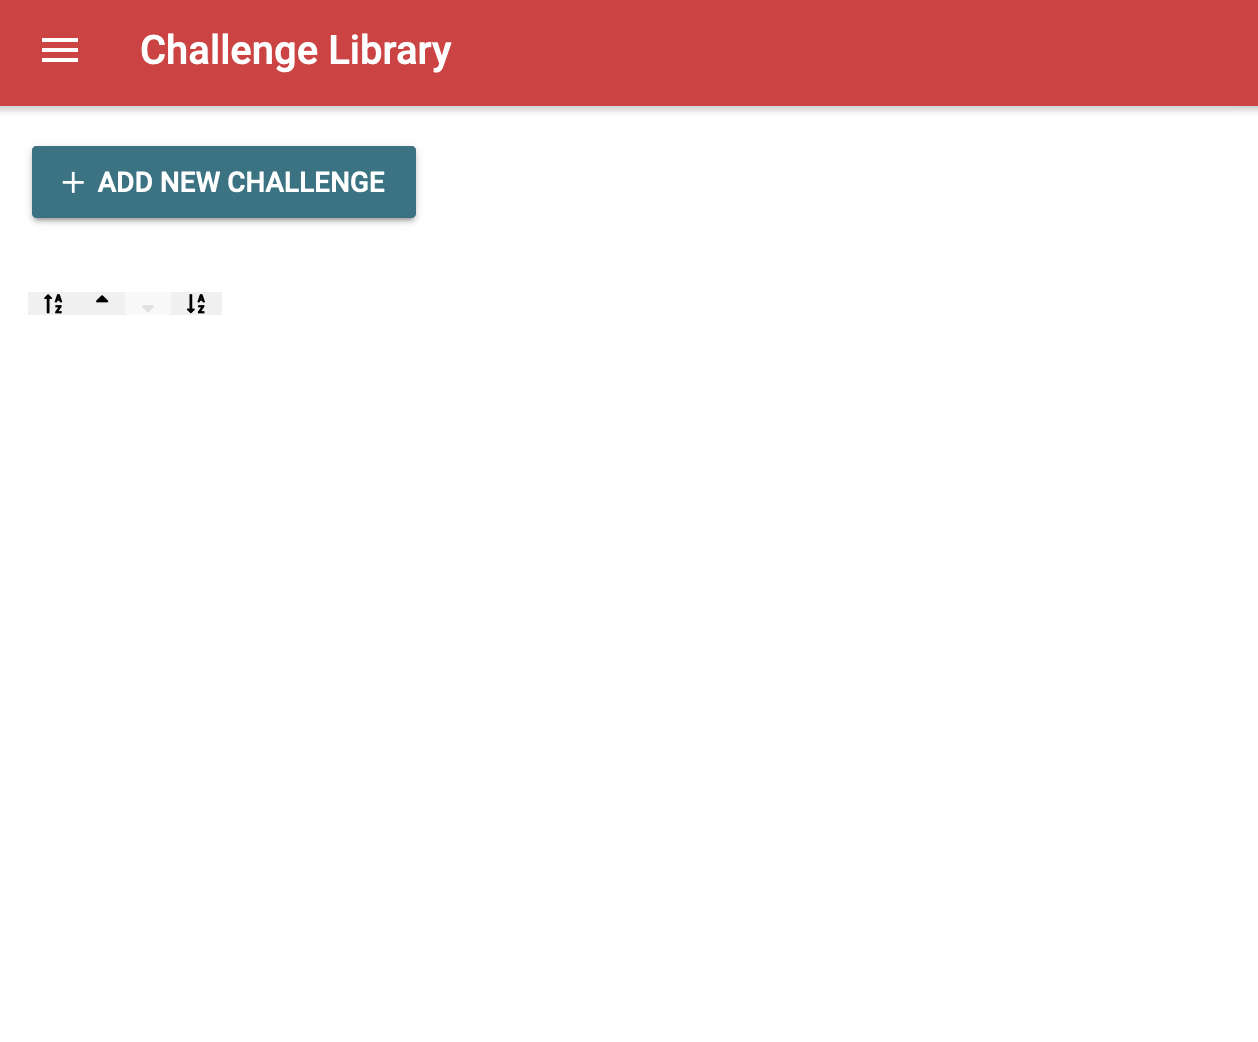 Click the button to add your first challenge to your challenge library